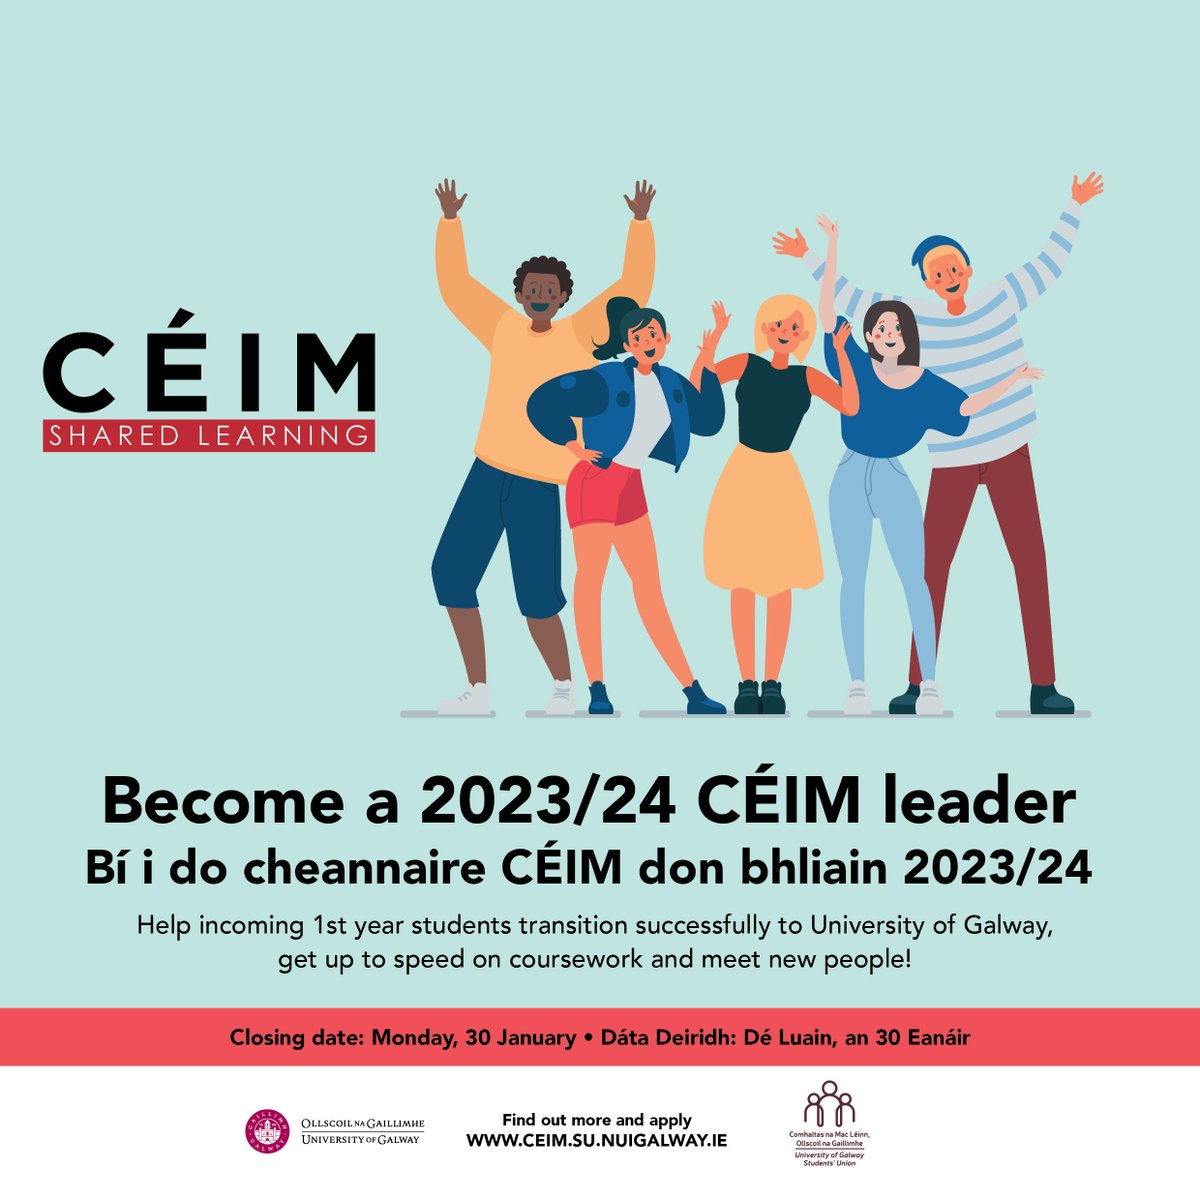 Would you like to develop and practice valuable transferable skills? Become a Geography @CEIMnuigsu student leader &earn your CÉIM Leadership Award in AY23/24 - applications welcome from 1st & 2nd yr students by Monday Jan 30th. Learn More Here: ceim.su.nuigalway.ie/about/become-a…